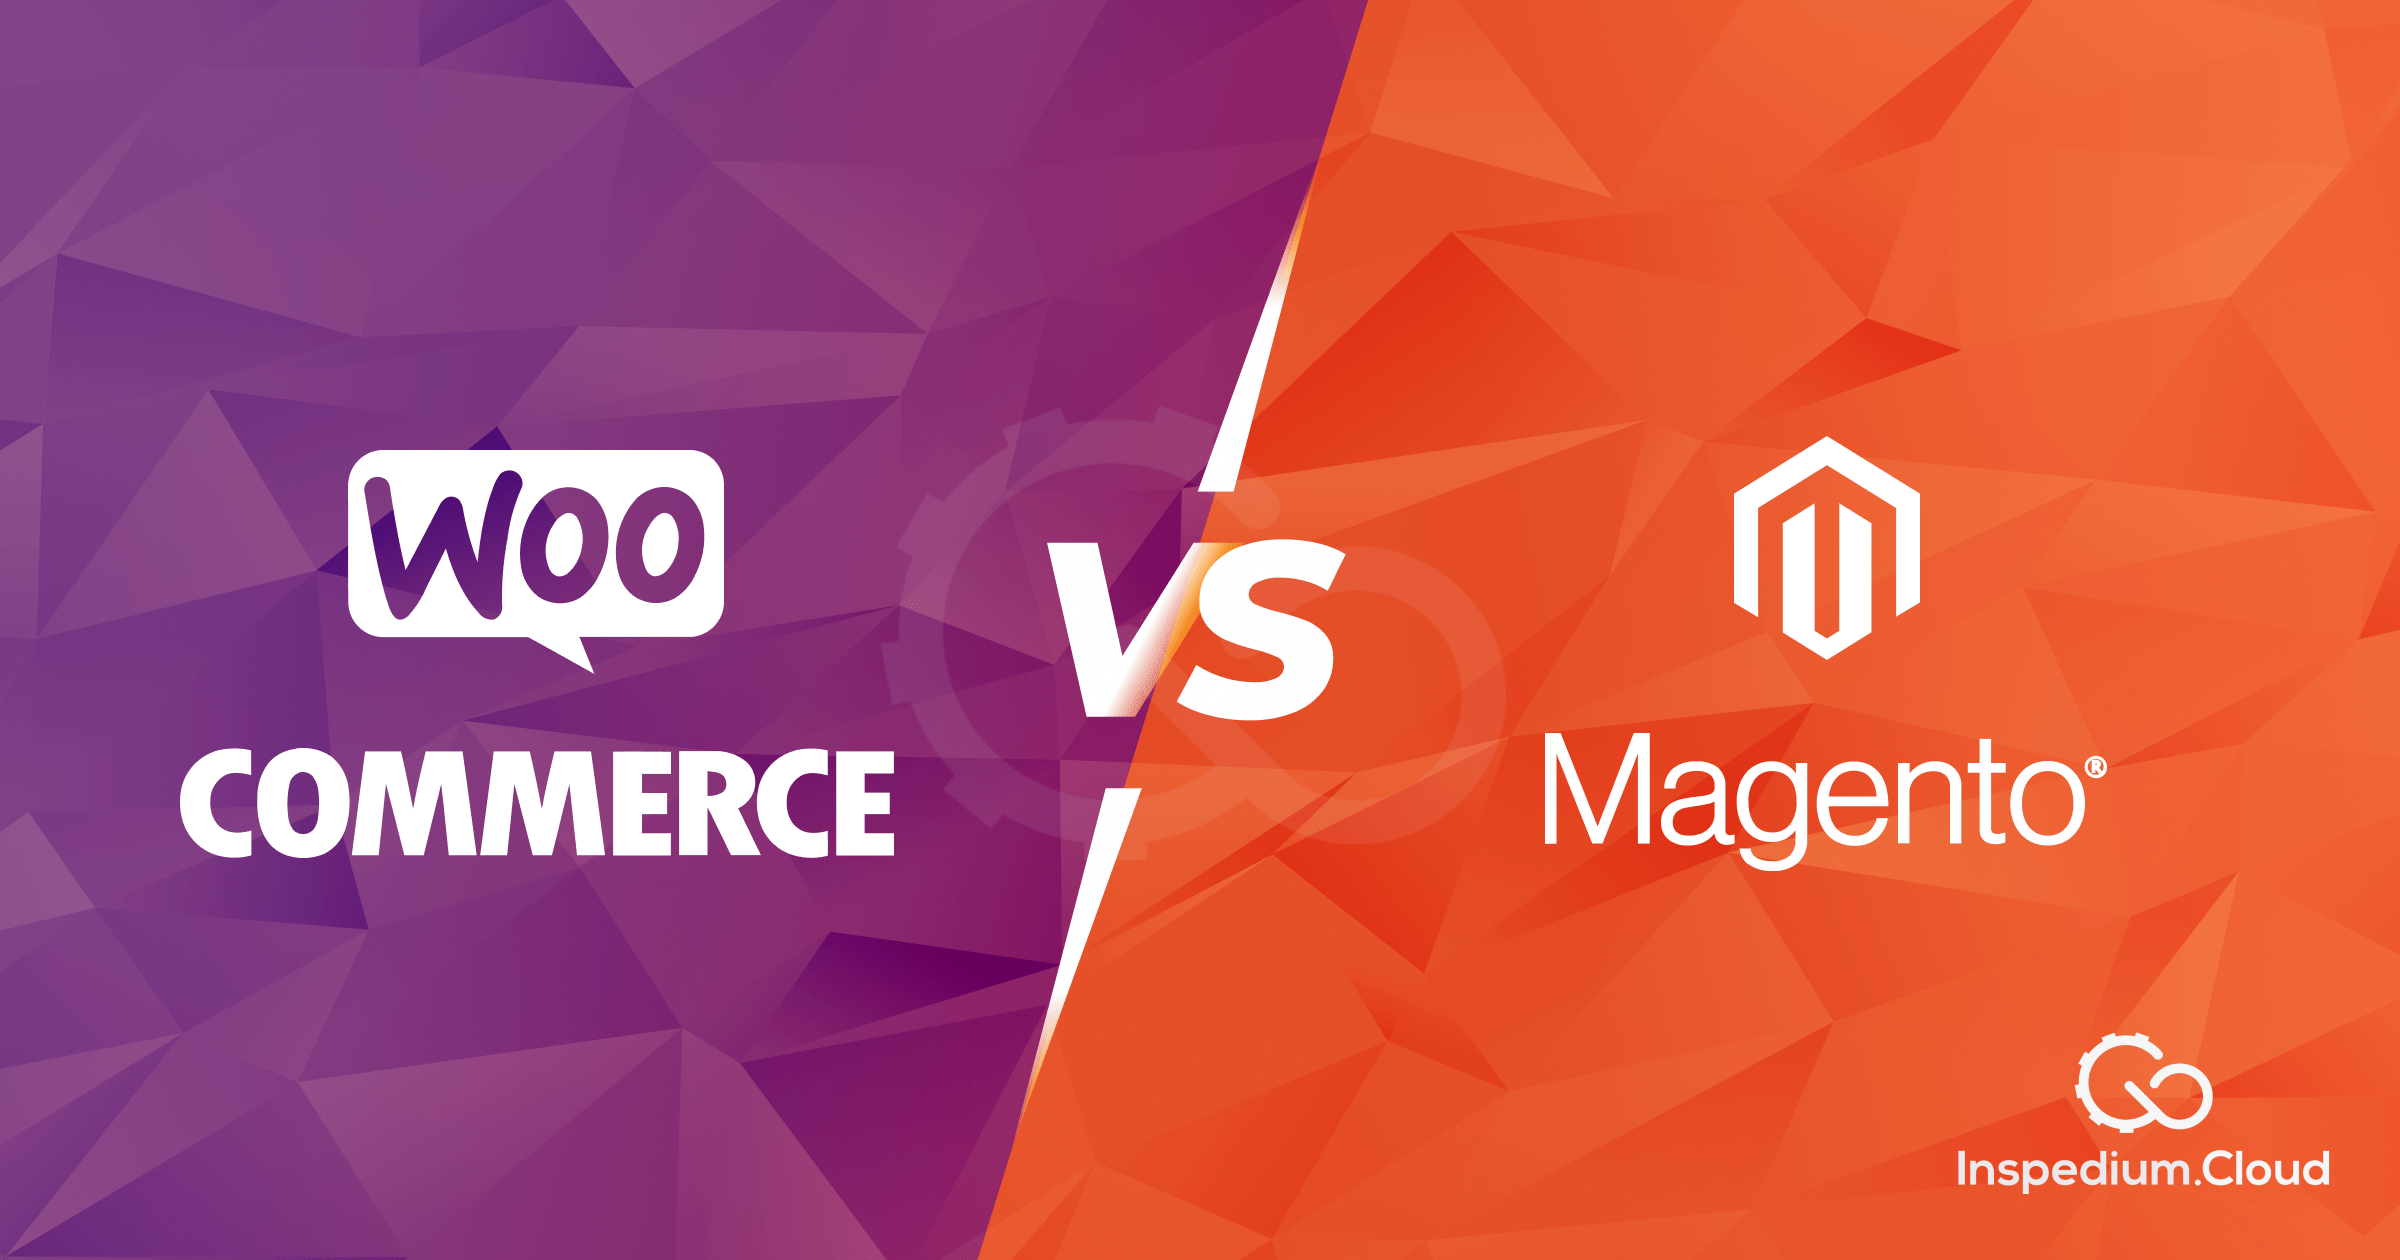 WooCommerce vs Magento; Which is the Better eCommerce Platform